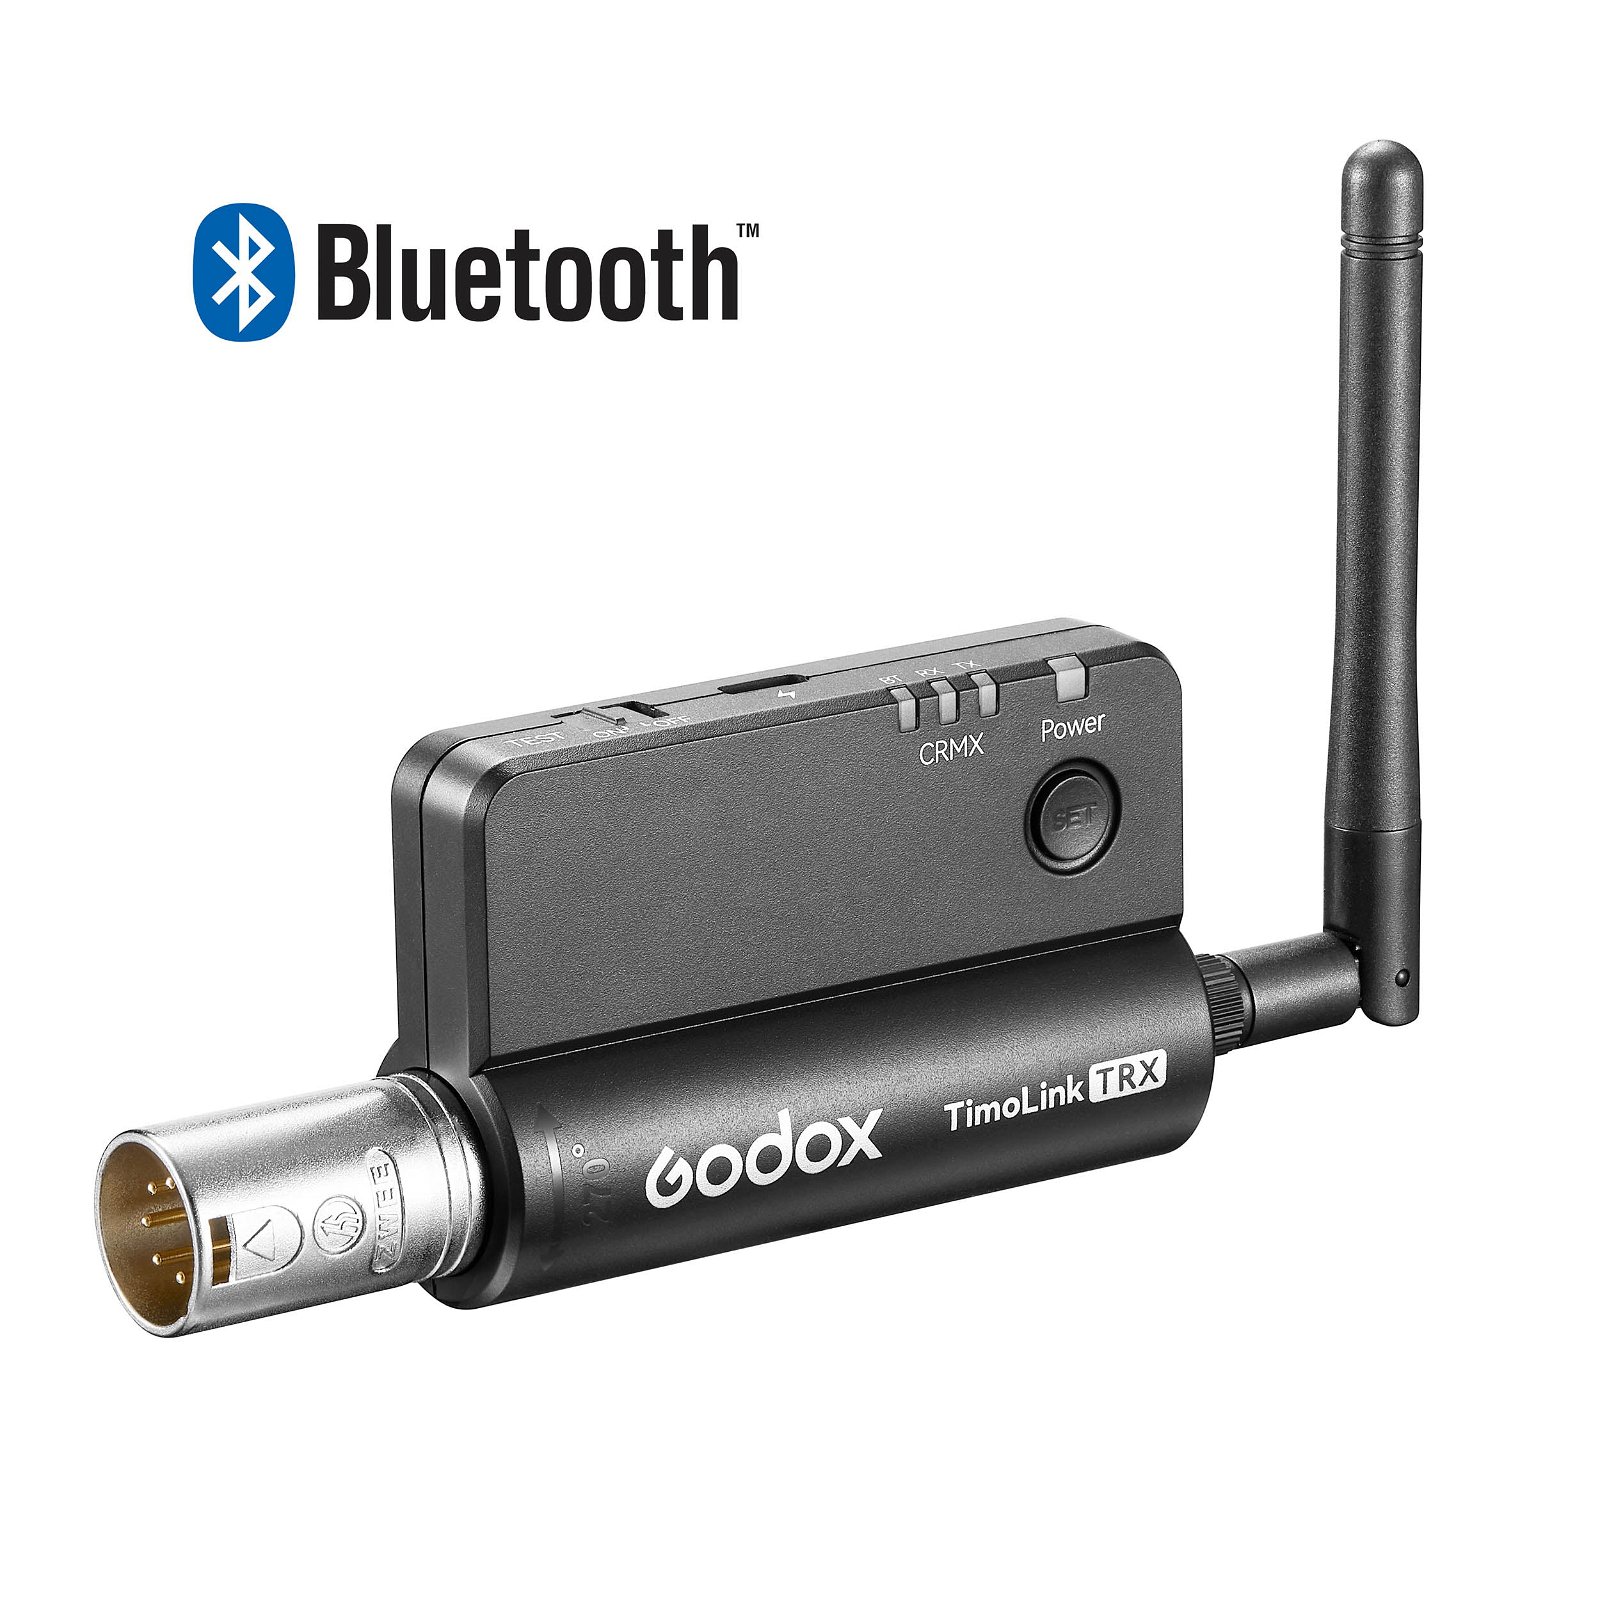 Image of TimoLink TRX Wireless DMX Transceiver with Bluetooth